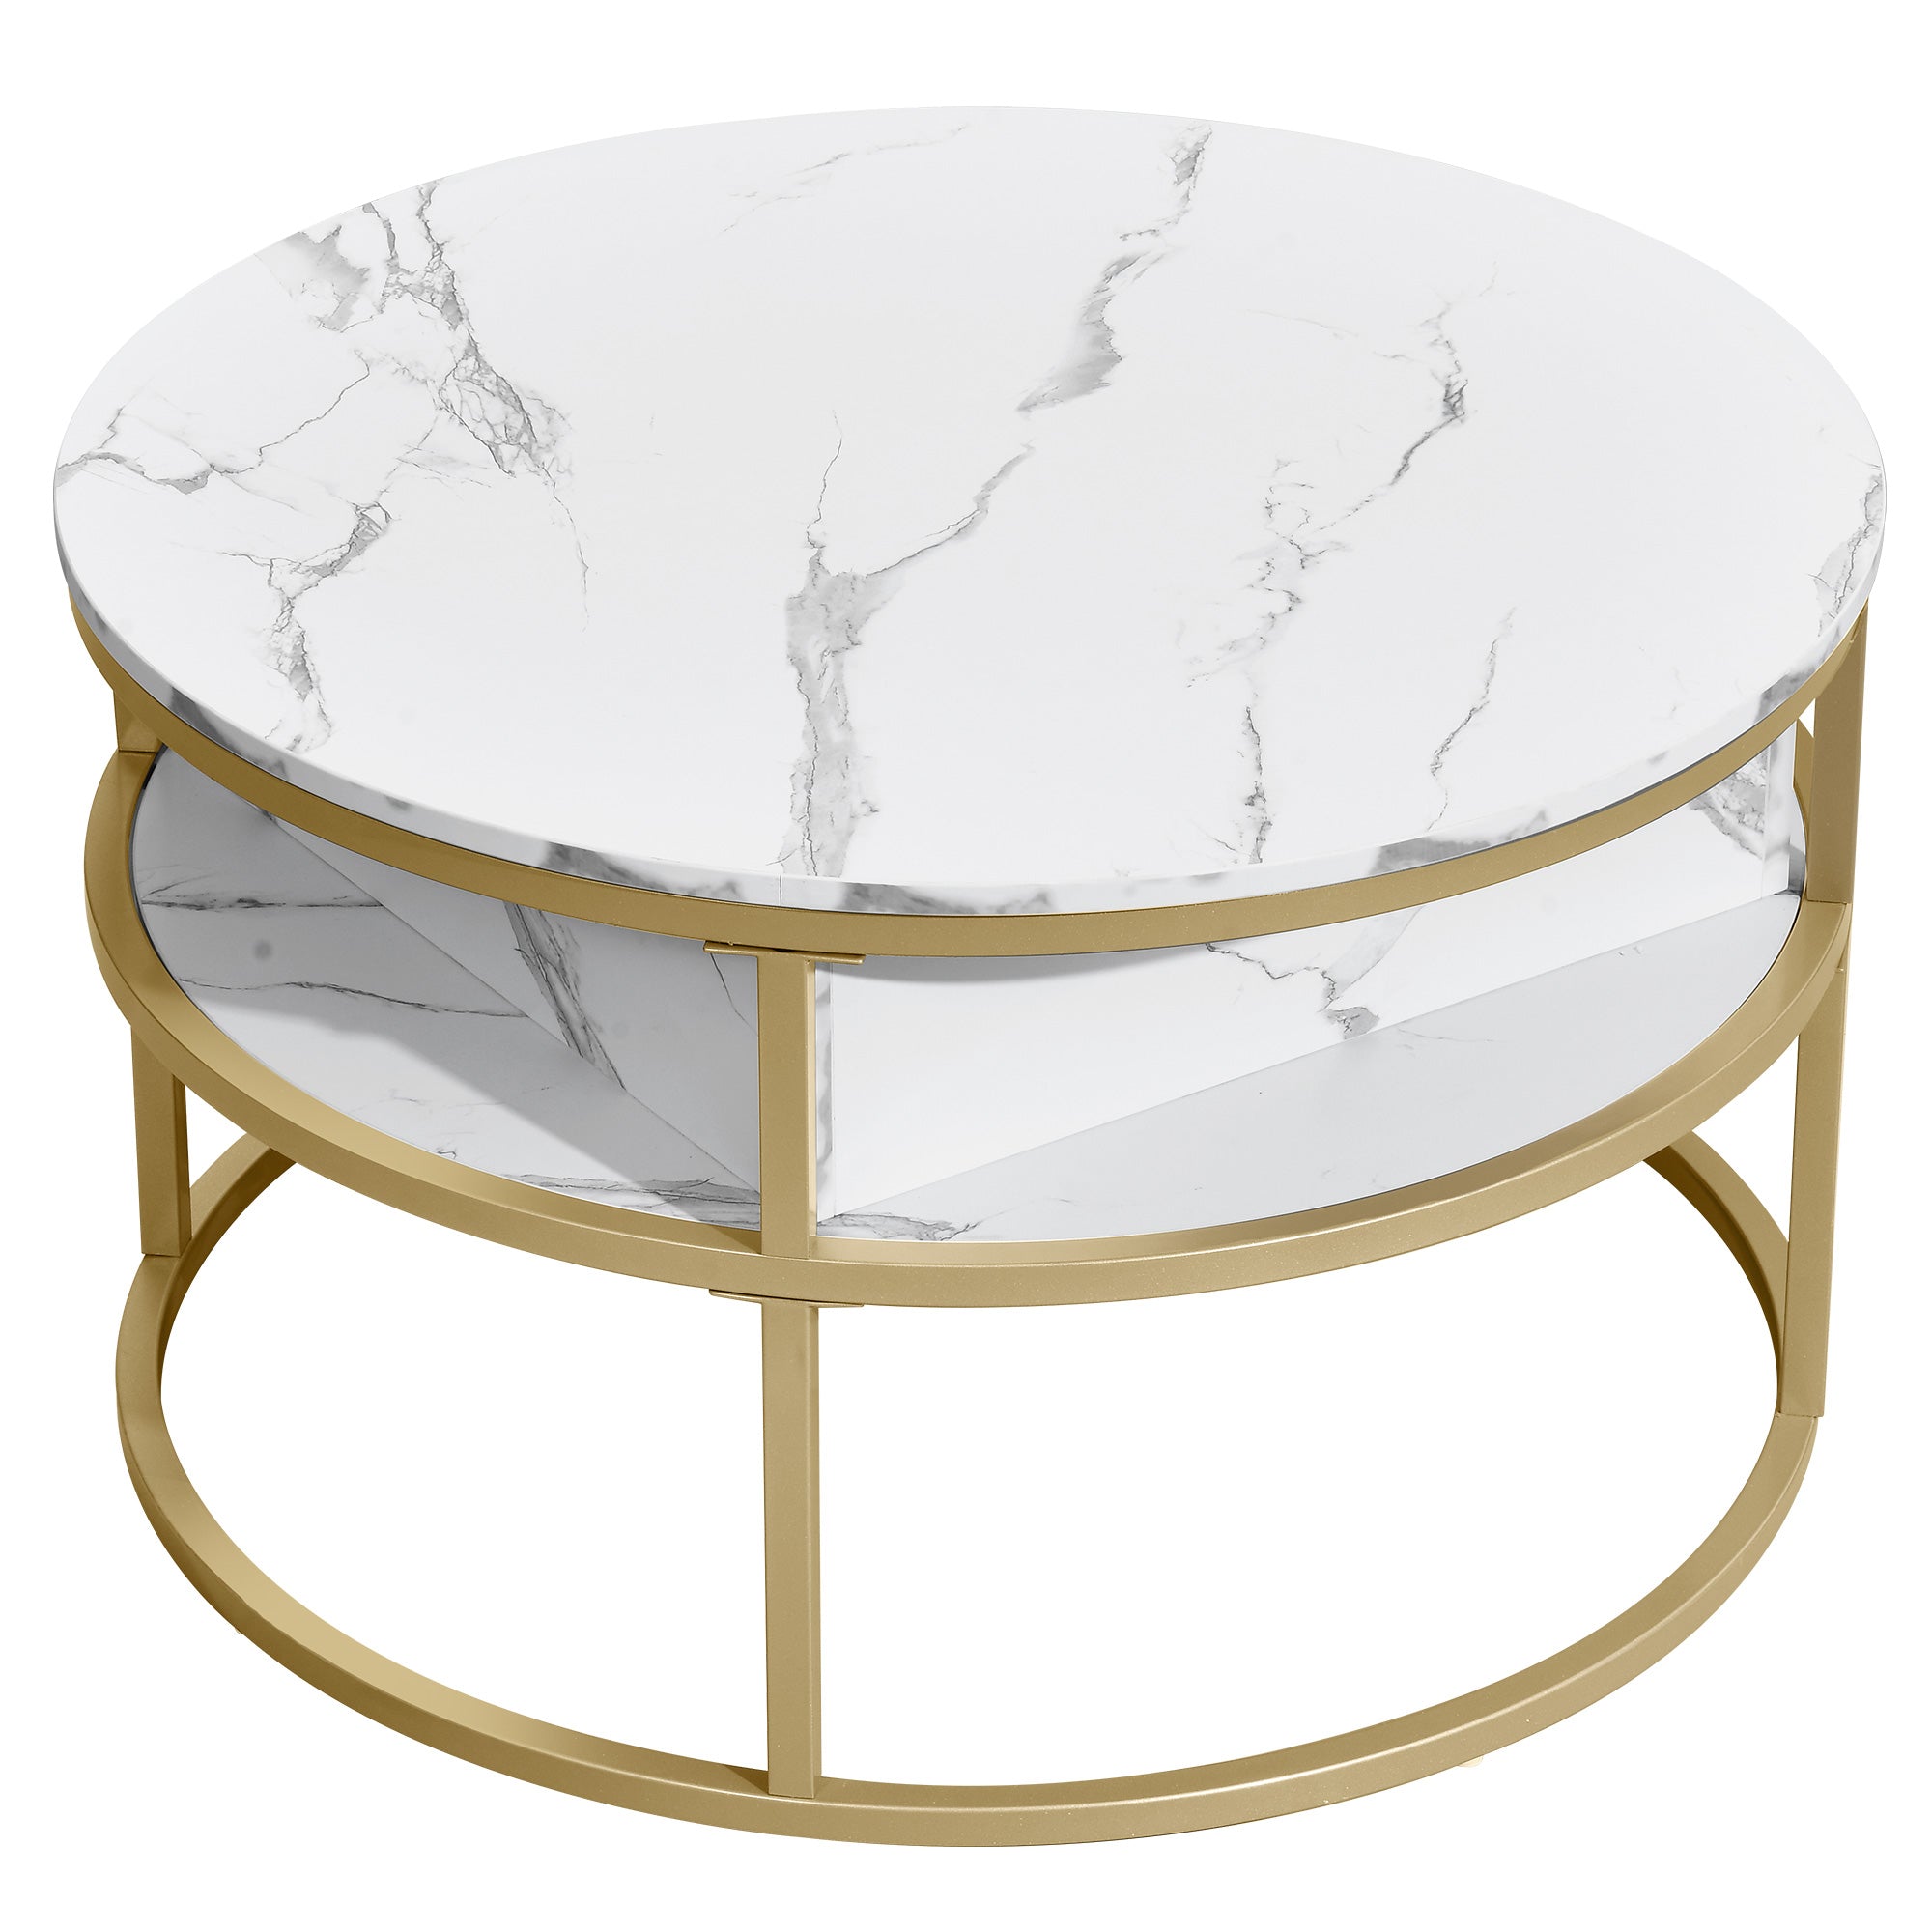 Odette 31.5" Round Lift Top Coffee Table with Storage For Living Room, White